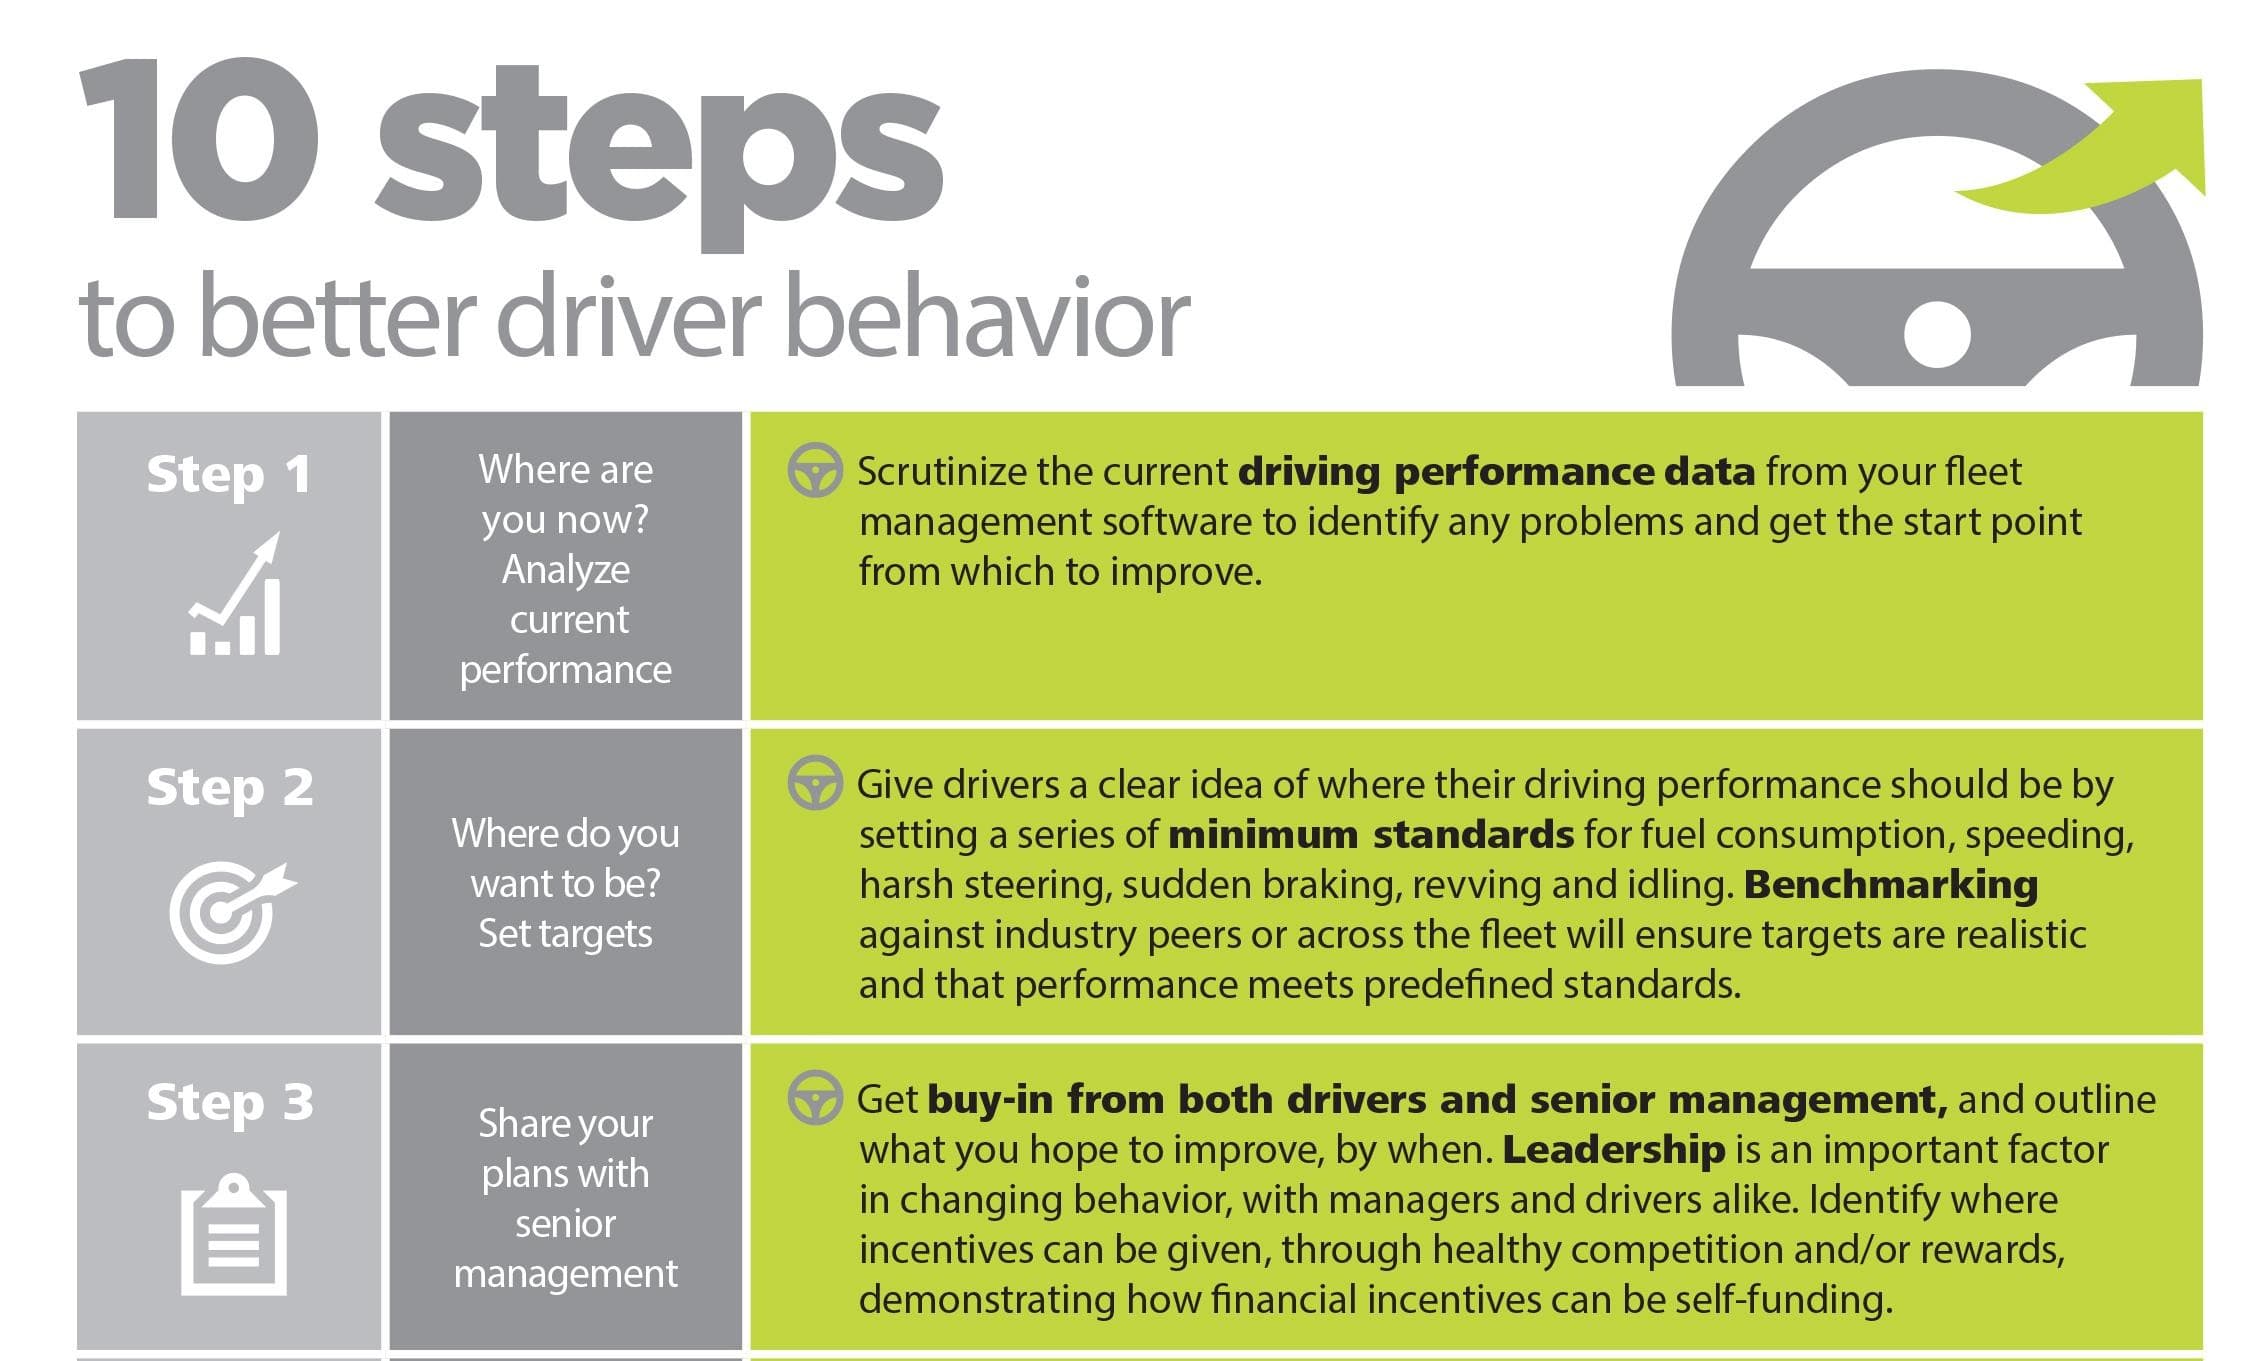 10 steps to becoming a better driver